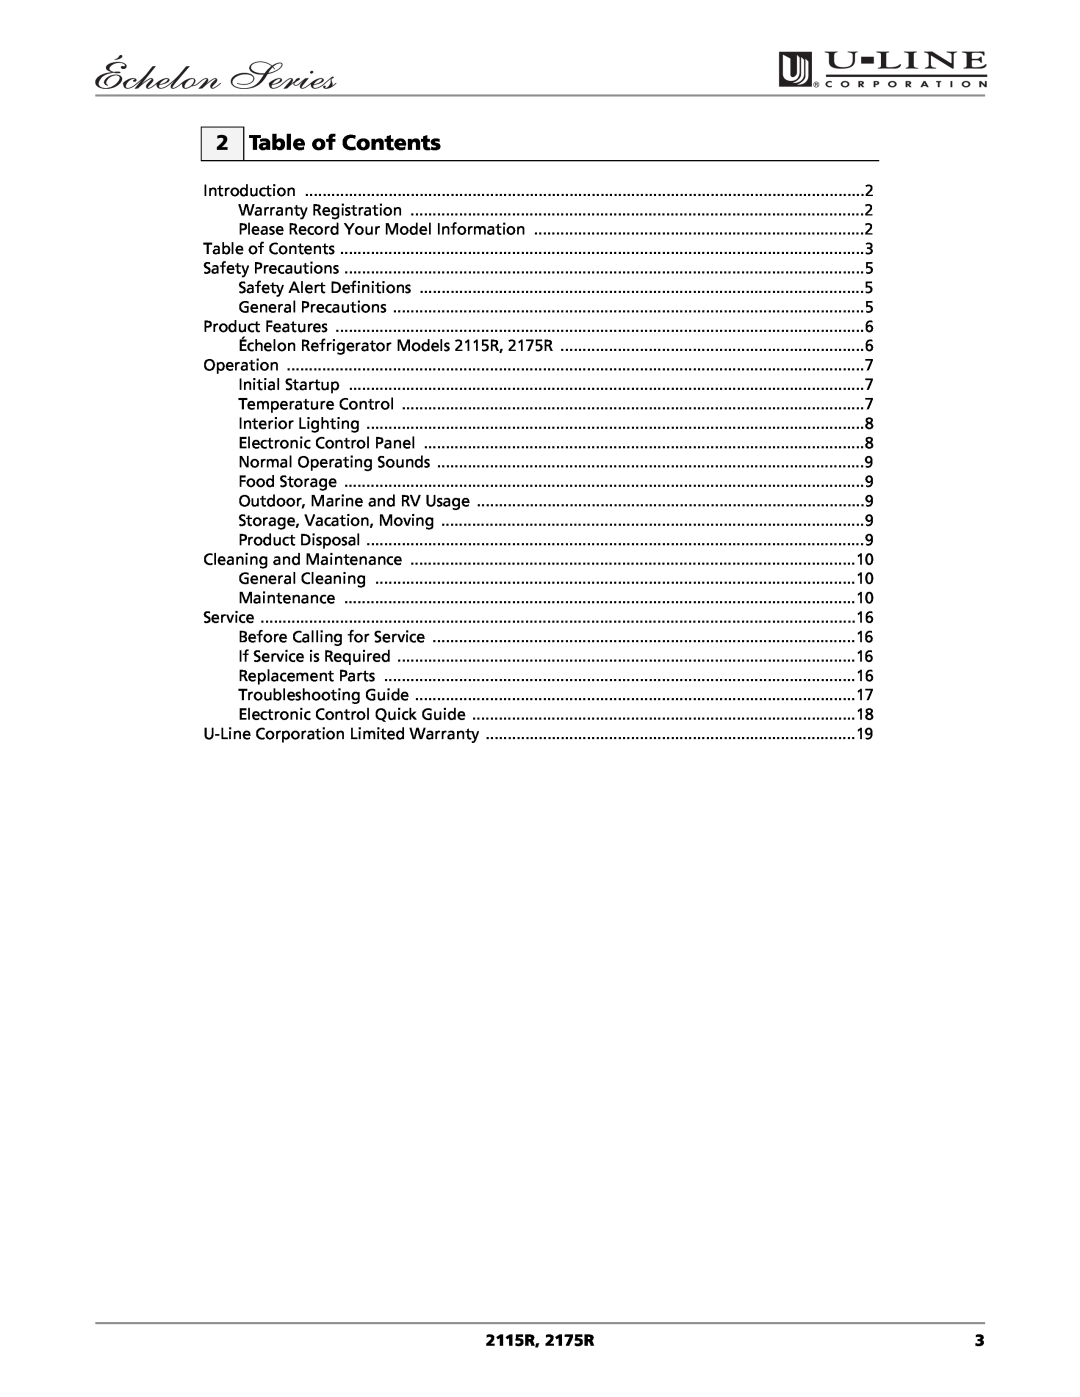 U-Line manual Table of Contents, 2115R, 2175R 